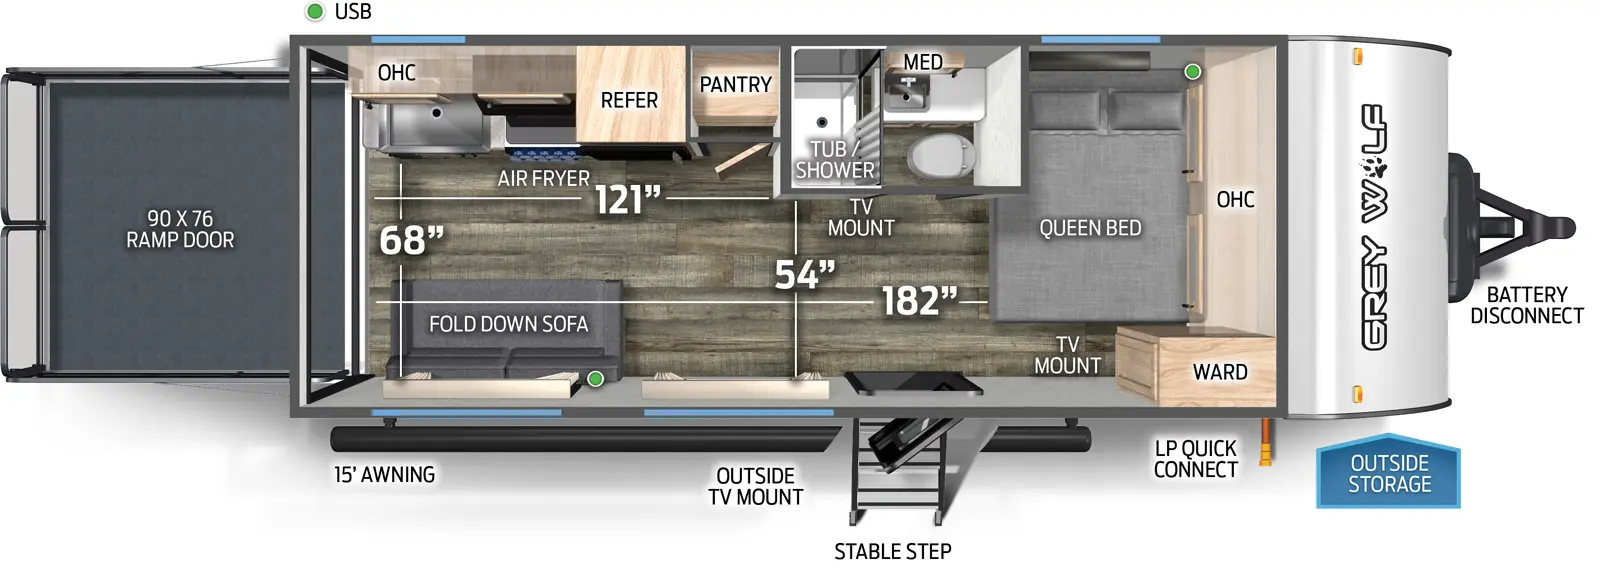 The 18RR has no slide outs, a rear ramp door and one entry door. Exterior features include outside TV mount, mid stable step entry, 15 foot awning, LP quick connect, outside storage, and battery disconnect. Interior layout front to back: queen bed with overhead cabinet, wardrobe, and TV mount; off-door side aisle full bathroom with medicine cabinet; entry door; off-door side pantry, refrigerator, overhead cabinet, air fryer, and sink; door side fold down sofa. Cargo measurements: 182 inches from the rear of the trailer to the front queen bed; 54 inches from the side aisle bathroom to the door side wall; 121 inches from the rear of the trailer to the side aisle bathroom wall; 68 inches from the kitchen countertop to the door side wall; 90 inch by 76 inch rear ramp door.